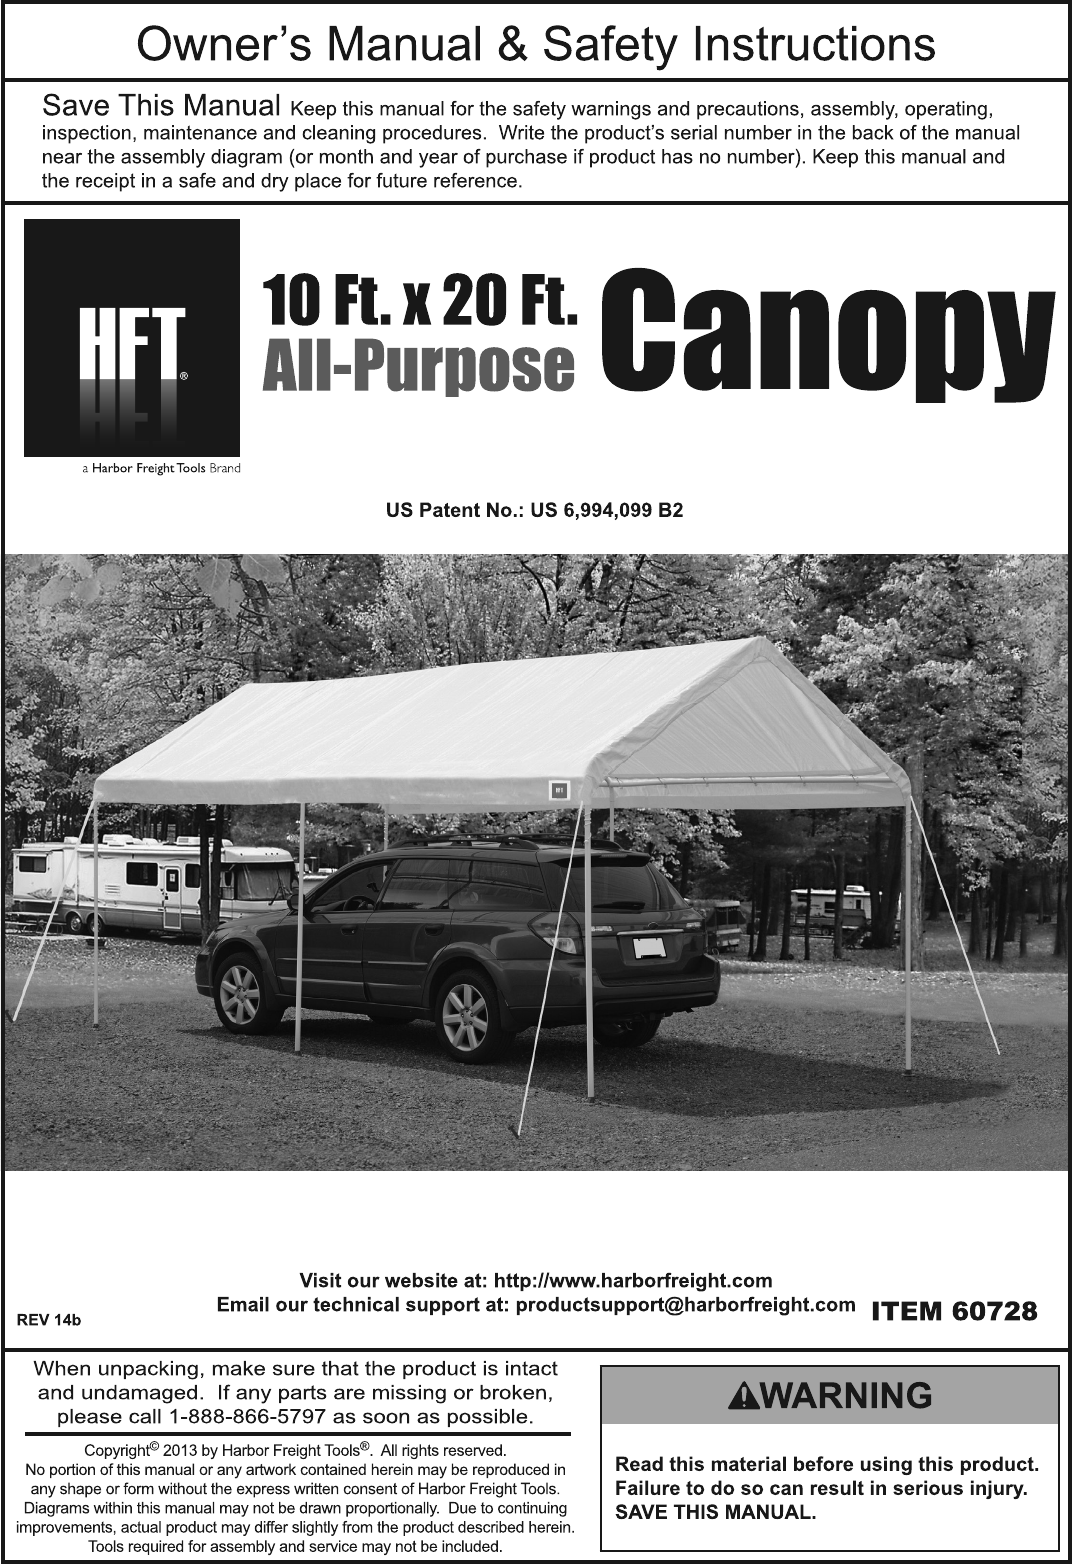 Harbor Freight 10 Ft X 20 Portable Car Canopy Product Manual